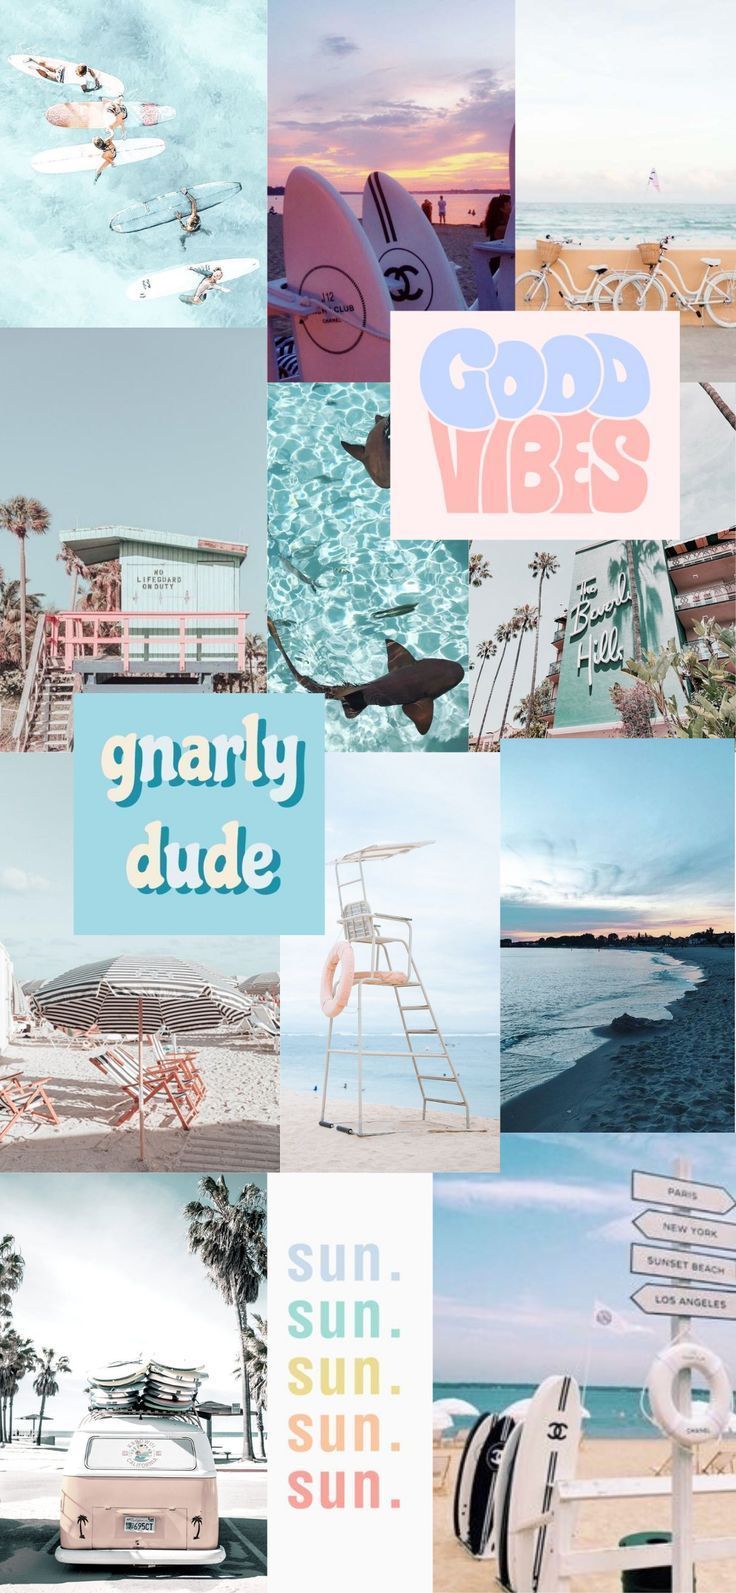 A collage of different beach photos and words such as good vibes and gnarly dude - Beach, coast, collage